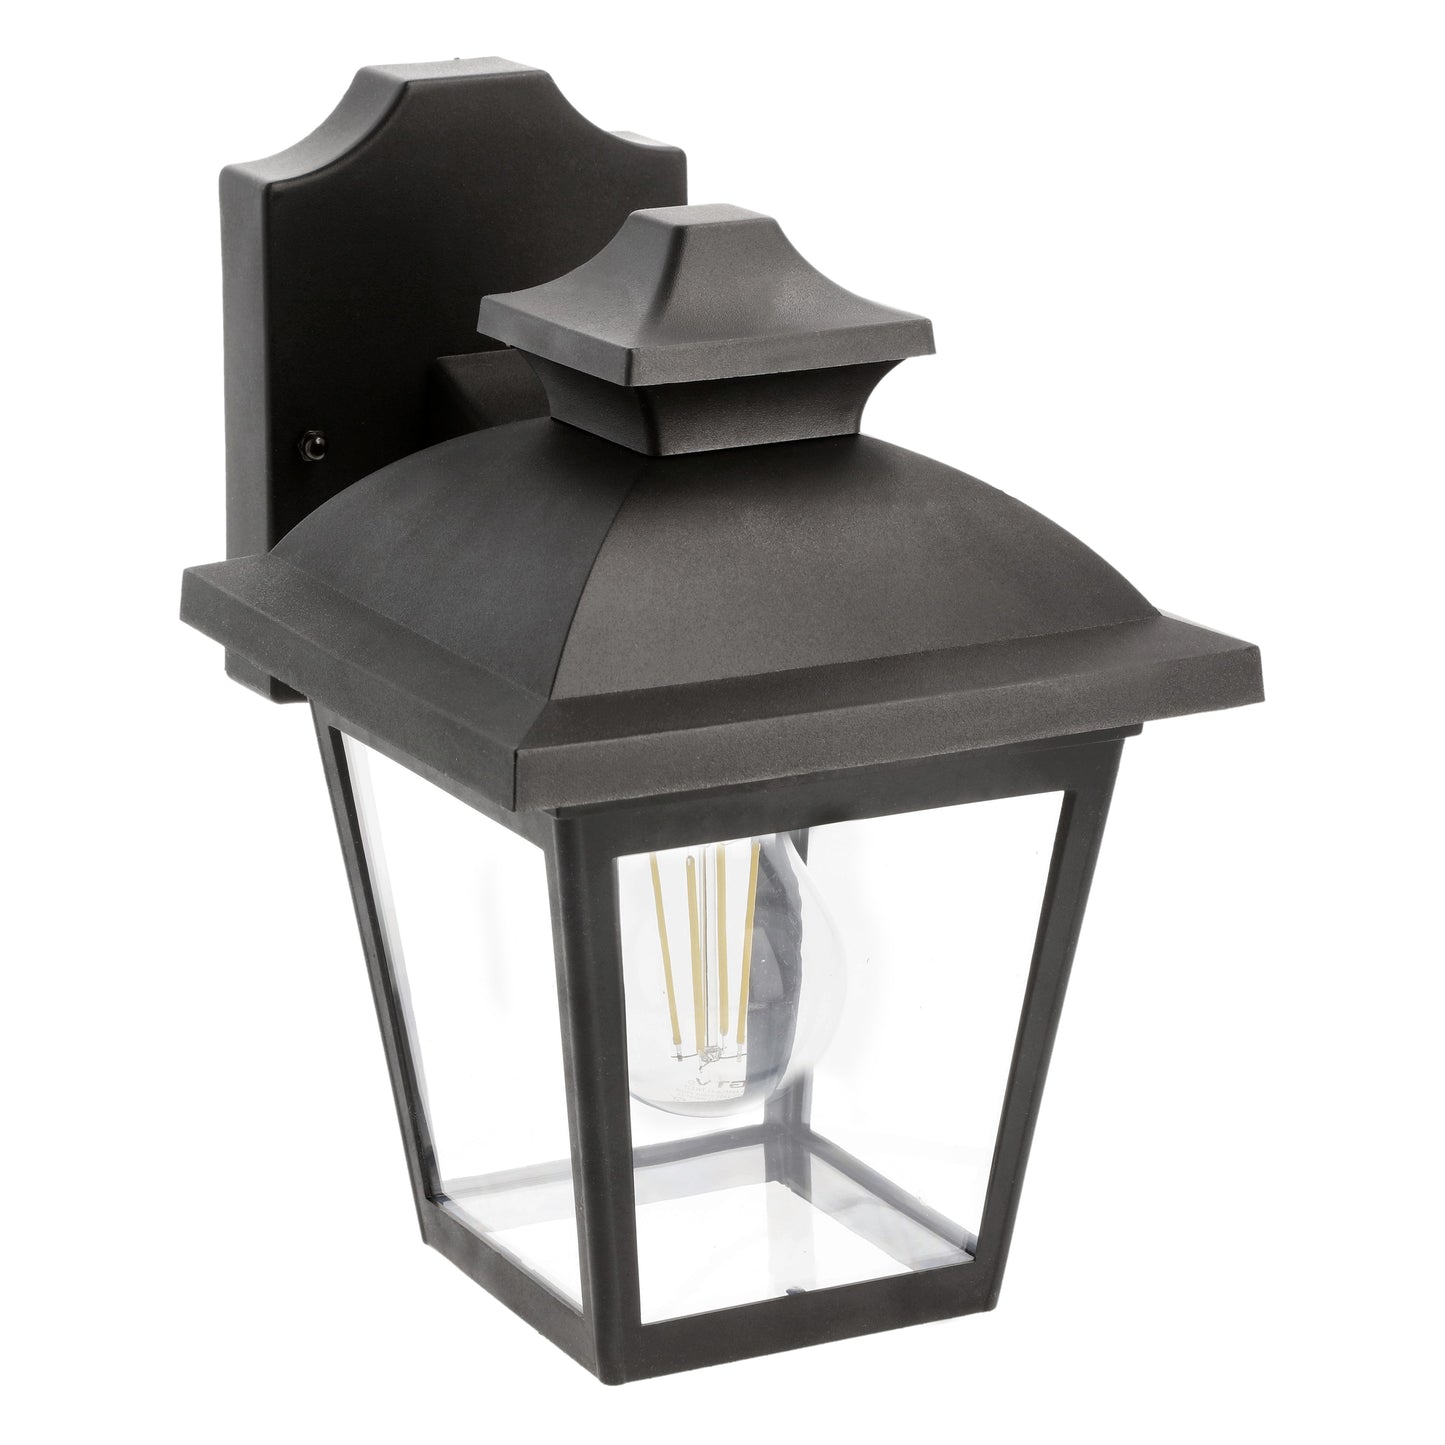 Our Hope lantern wall light delivers on style and durability and is a smart choice for your exterior lighting. With its black polycarbonate construction teamed with polycarbonate panes, this lantern is hardwearing and rust and weatherproof. Built for life outdoors, it has an IP44 rating which means it can withstand the harshest of weather conditions. For sophisticated yet robust outdoor lighting, our Yasmin black outdoor traditional lantern is a strong contender.